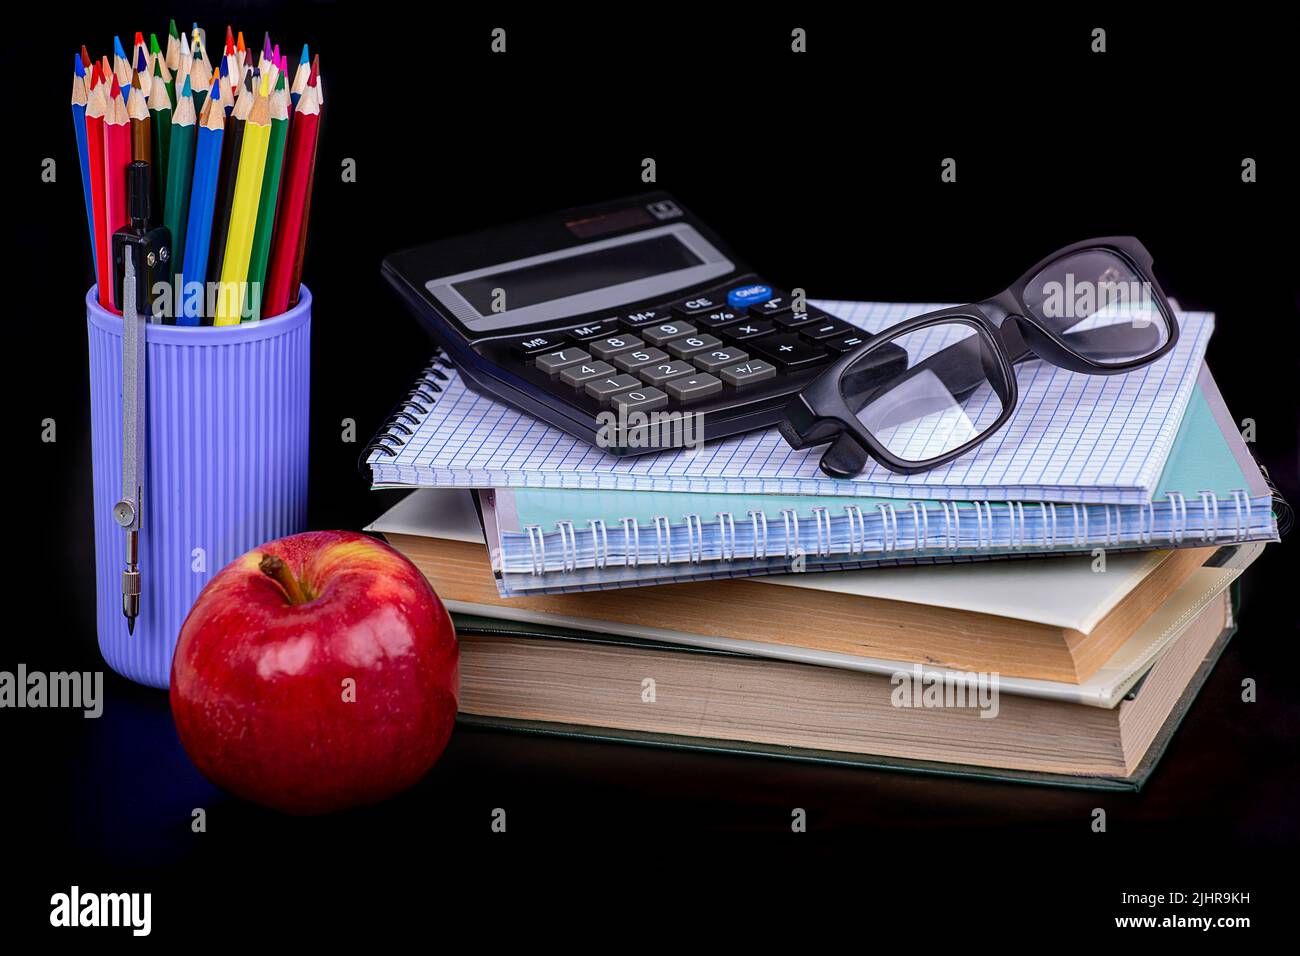 I'm going to school soon. Books, notebooks, calculator, apple, glasses and colored pencils on a black background Stock Photo